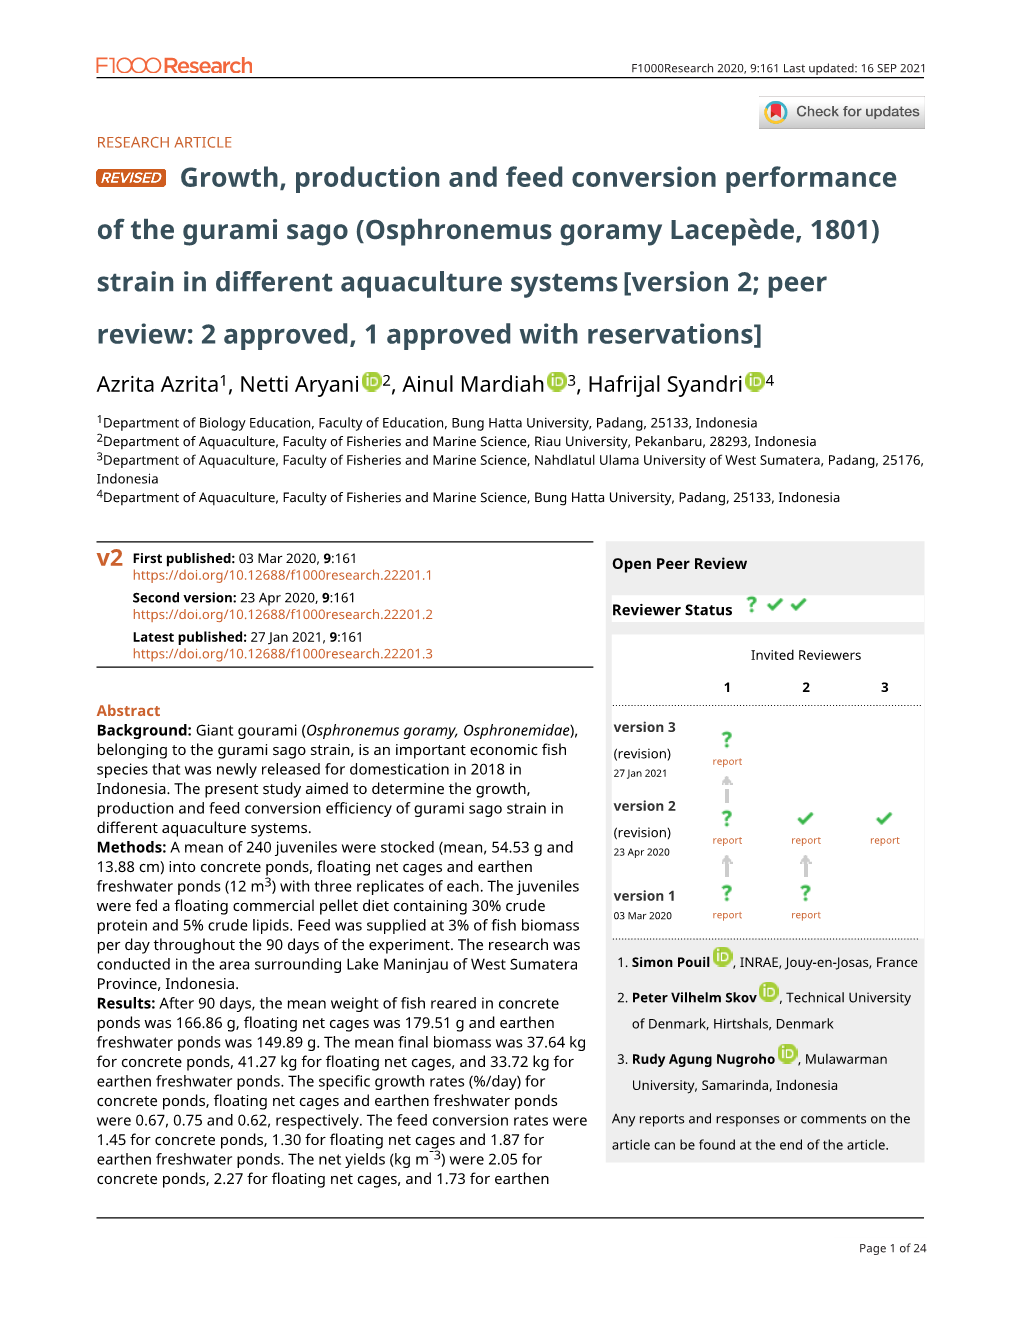 Growth, Production and Feed Conversion Performance of the Gurami Sago (Osphronemus Goramy Lacepède, 1801) Strain in Different A